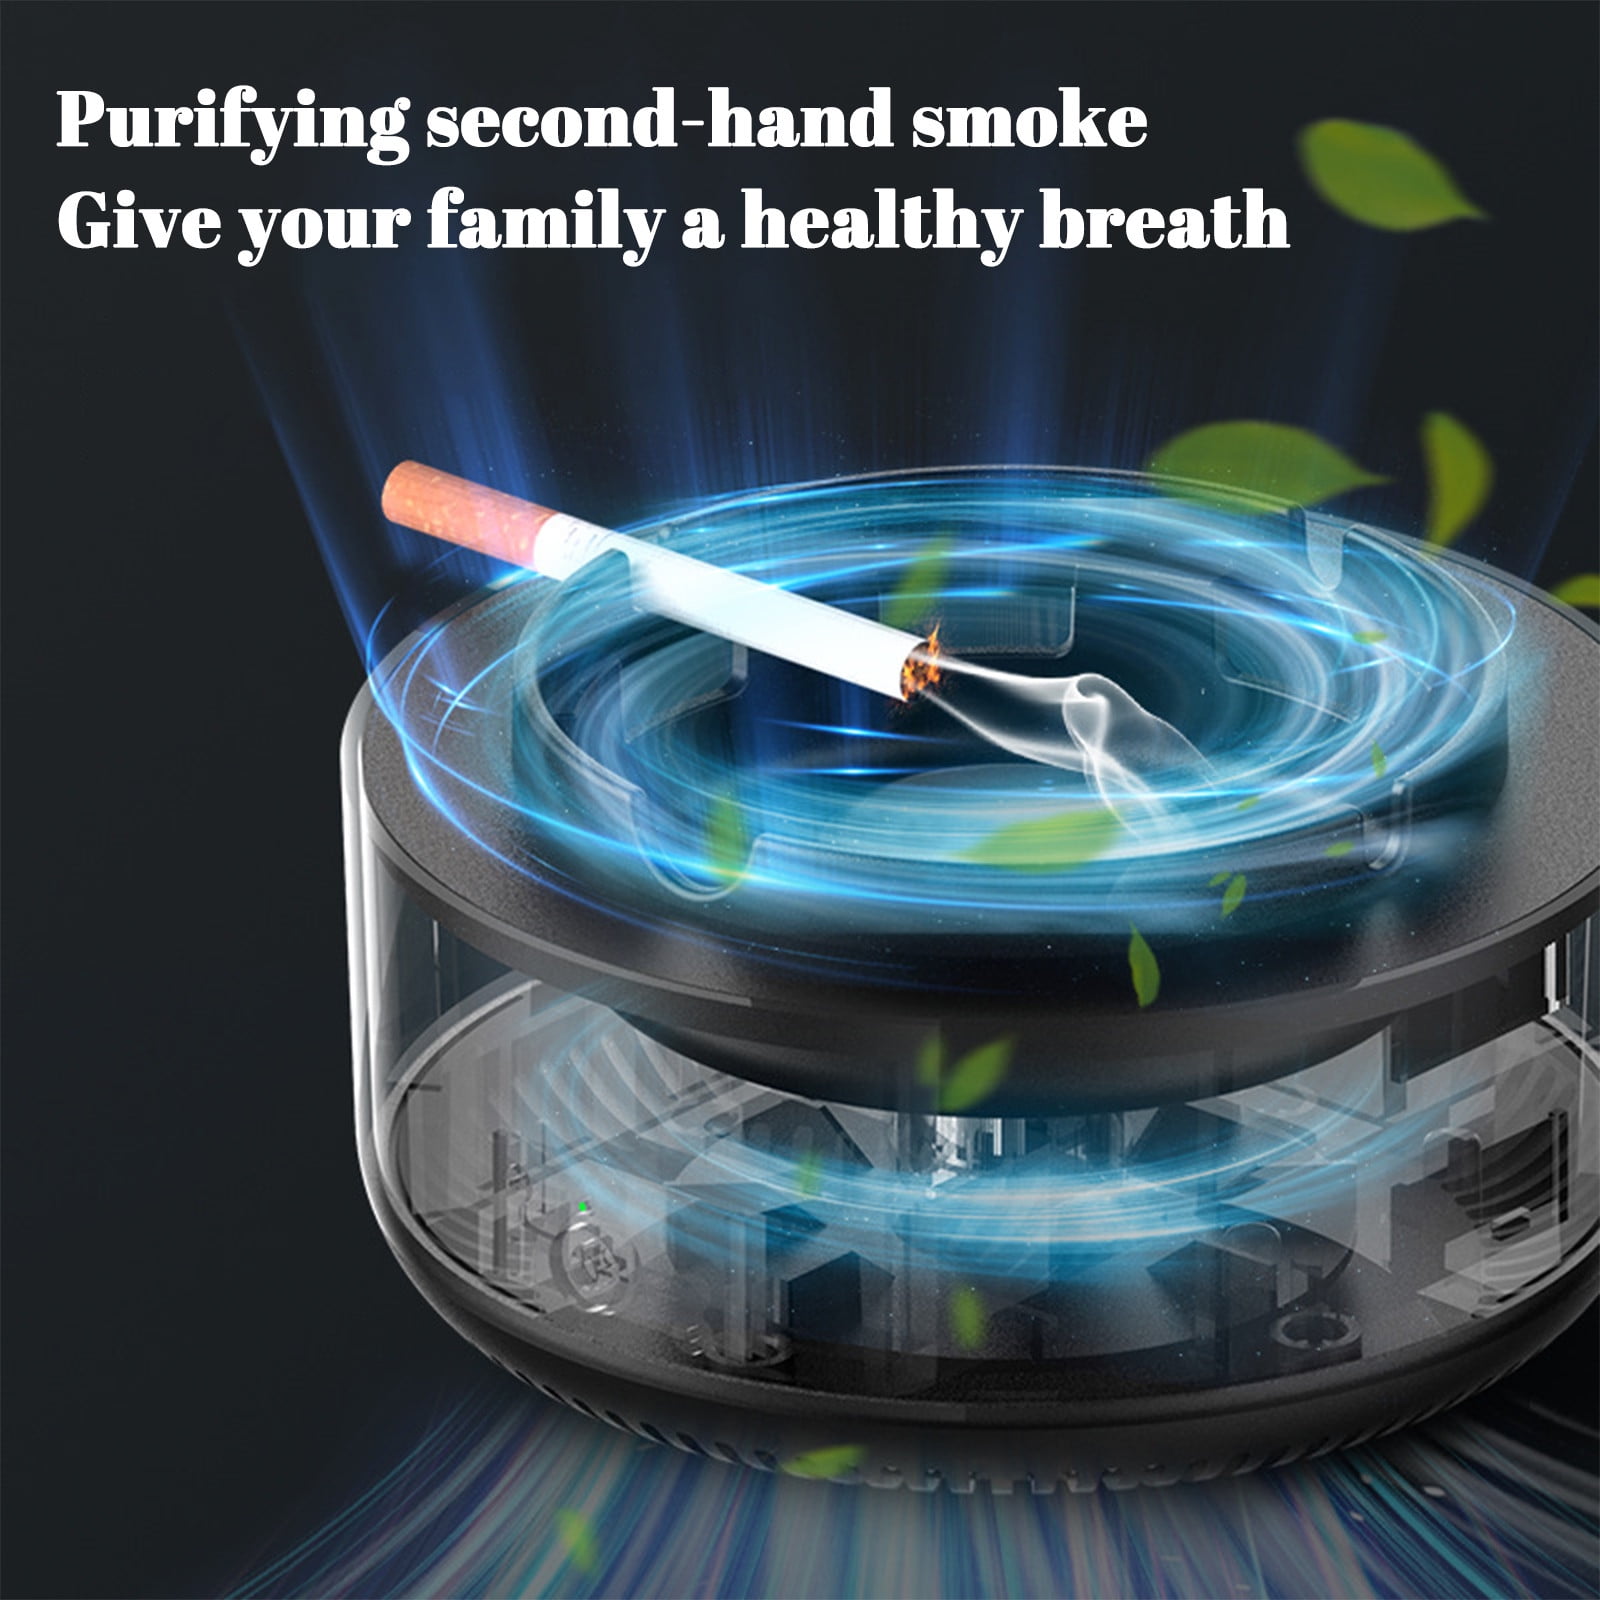 Back to School Savings! Feltree Ashtray, Purifier Ashtrays for Cigarettes Indoor, 2 in 1 Purifier Multifunctional Fresher for Home and Office, 5.2x2.95in